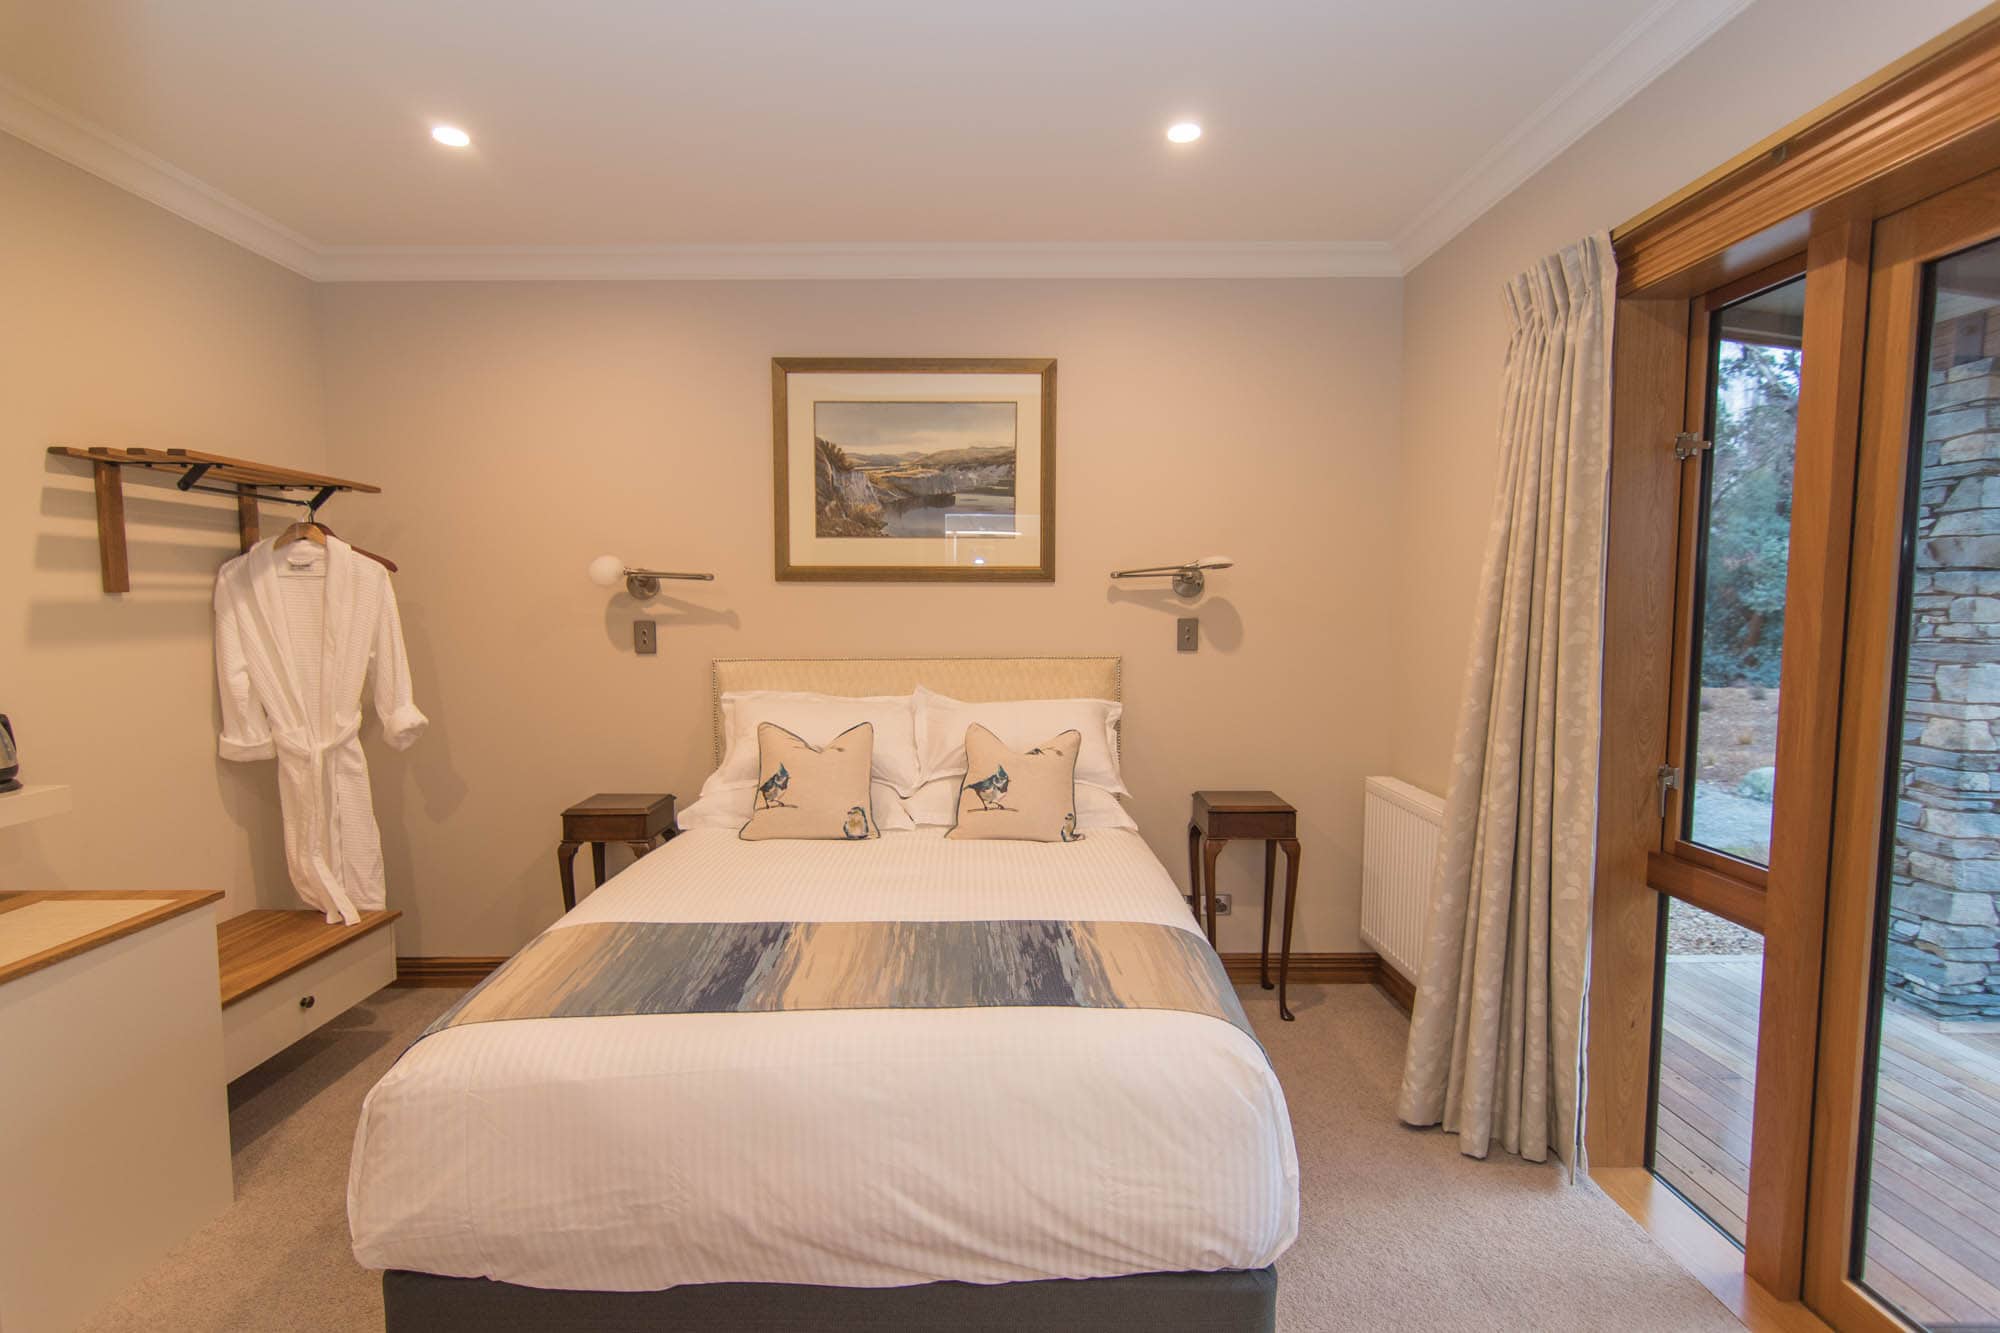 1st guest room at Merino Lodge